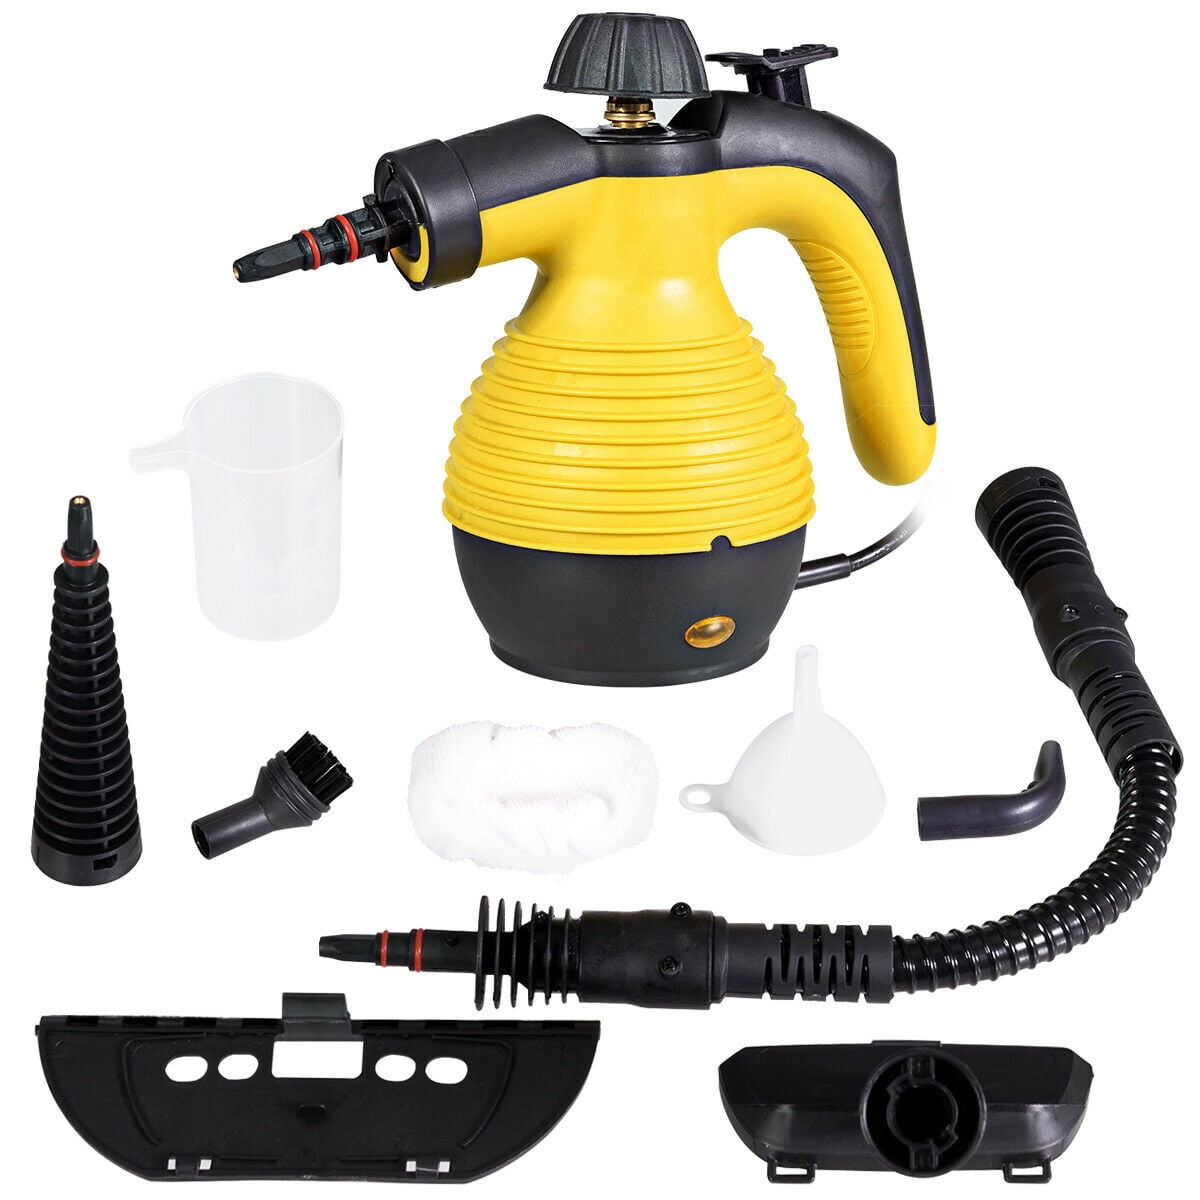 1050W Electric Steam Cleaner Portable Hand Held Powerful Steamer Cleaning Set 